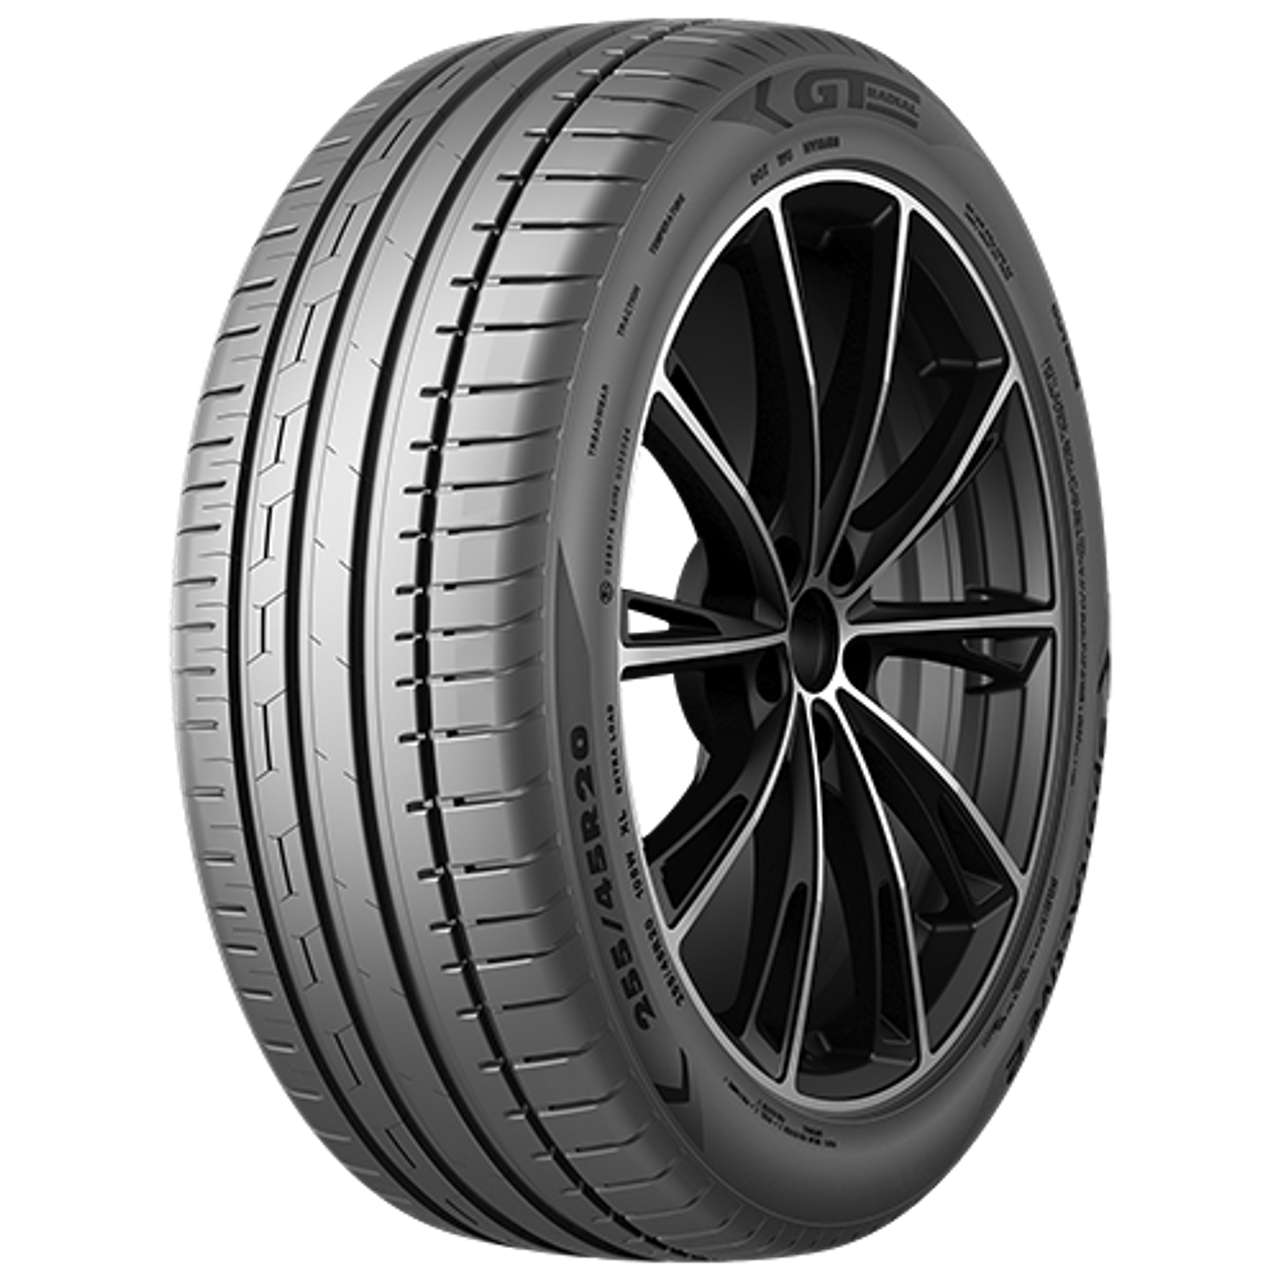 GT-RADIAL SPORTACTIVE 2 215/45R16 90V BSW